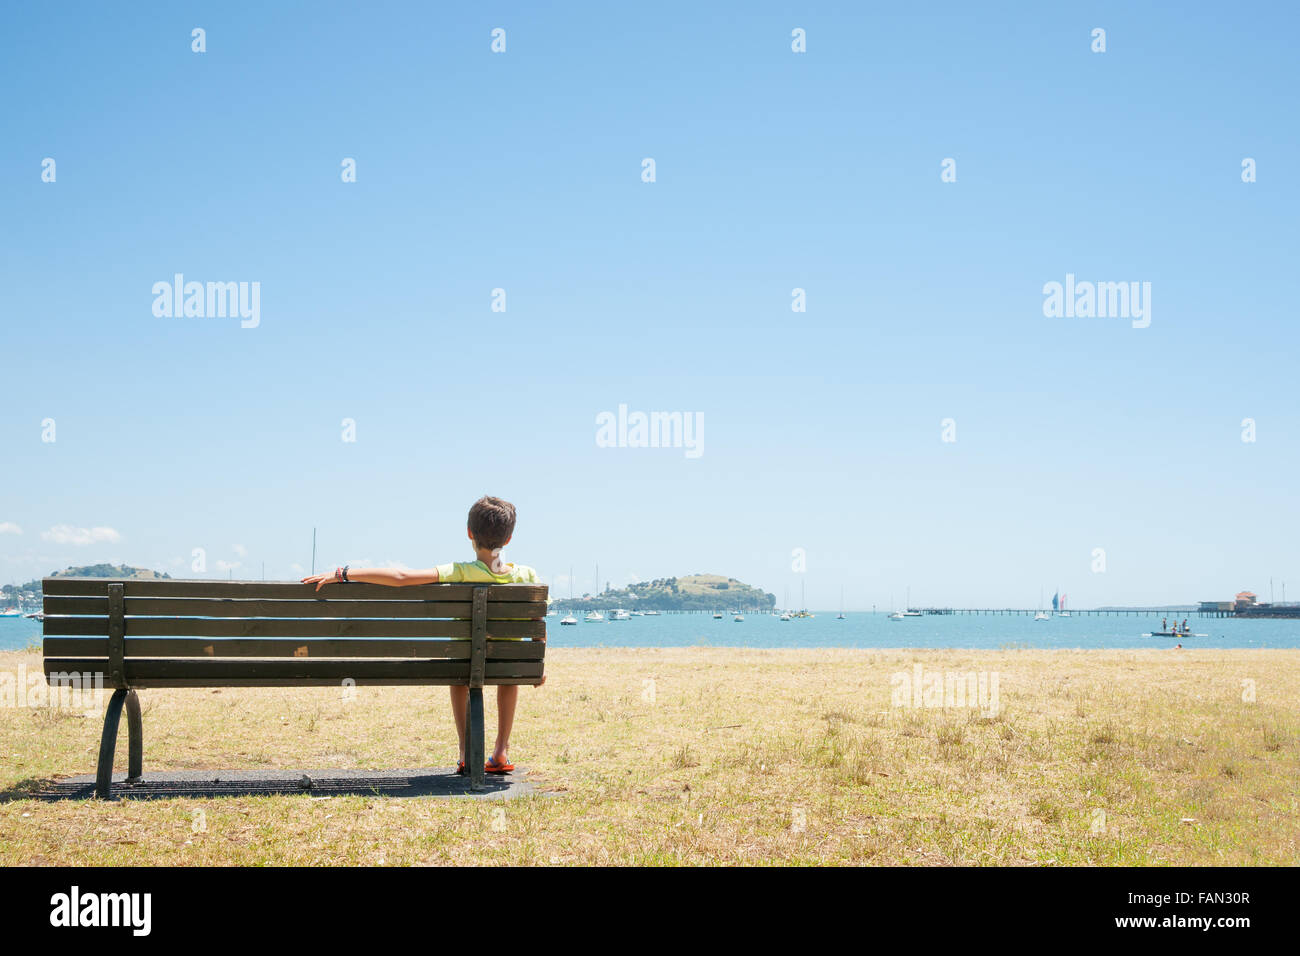 Boy sits on bench seat in the bay. Summer day view across bay, Orakei Auckland, New Zealand under blue sky. Stock Photo